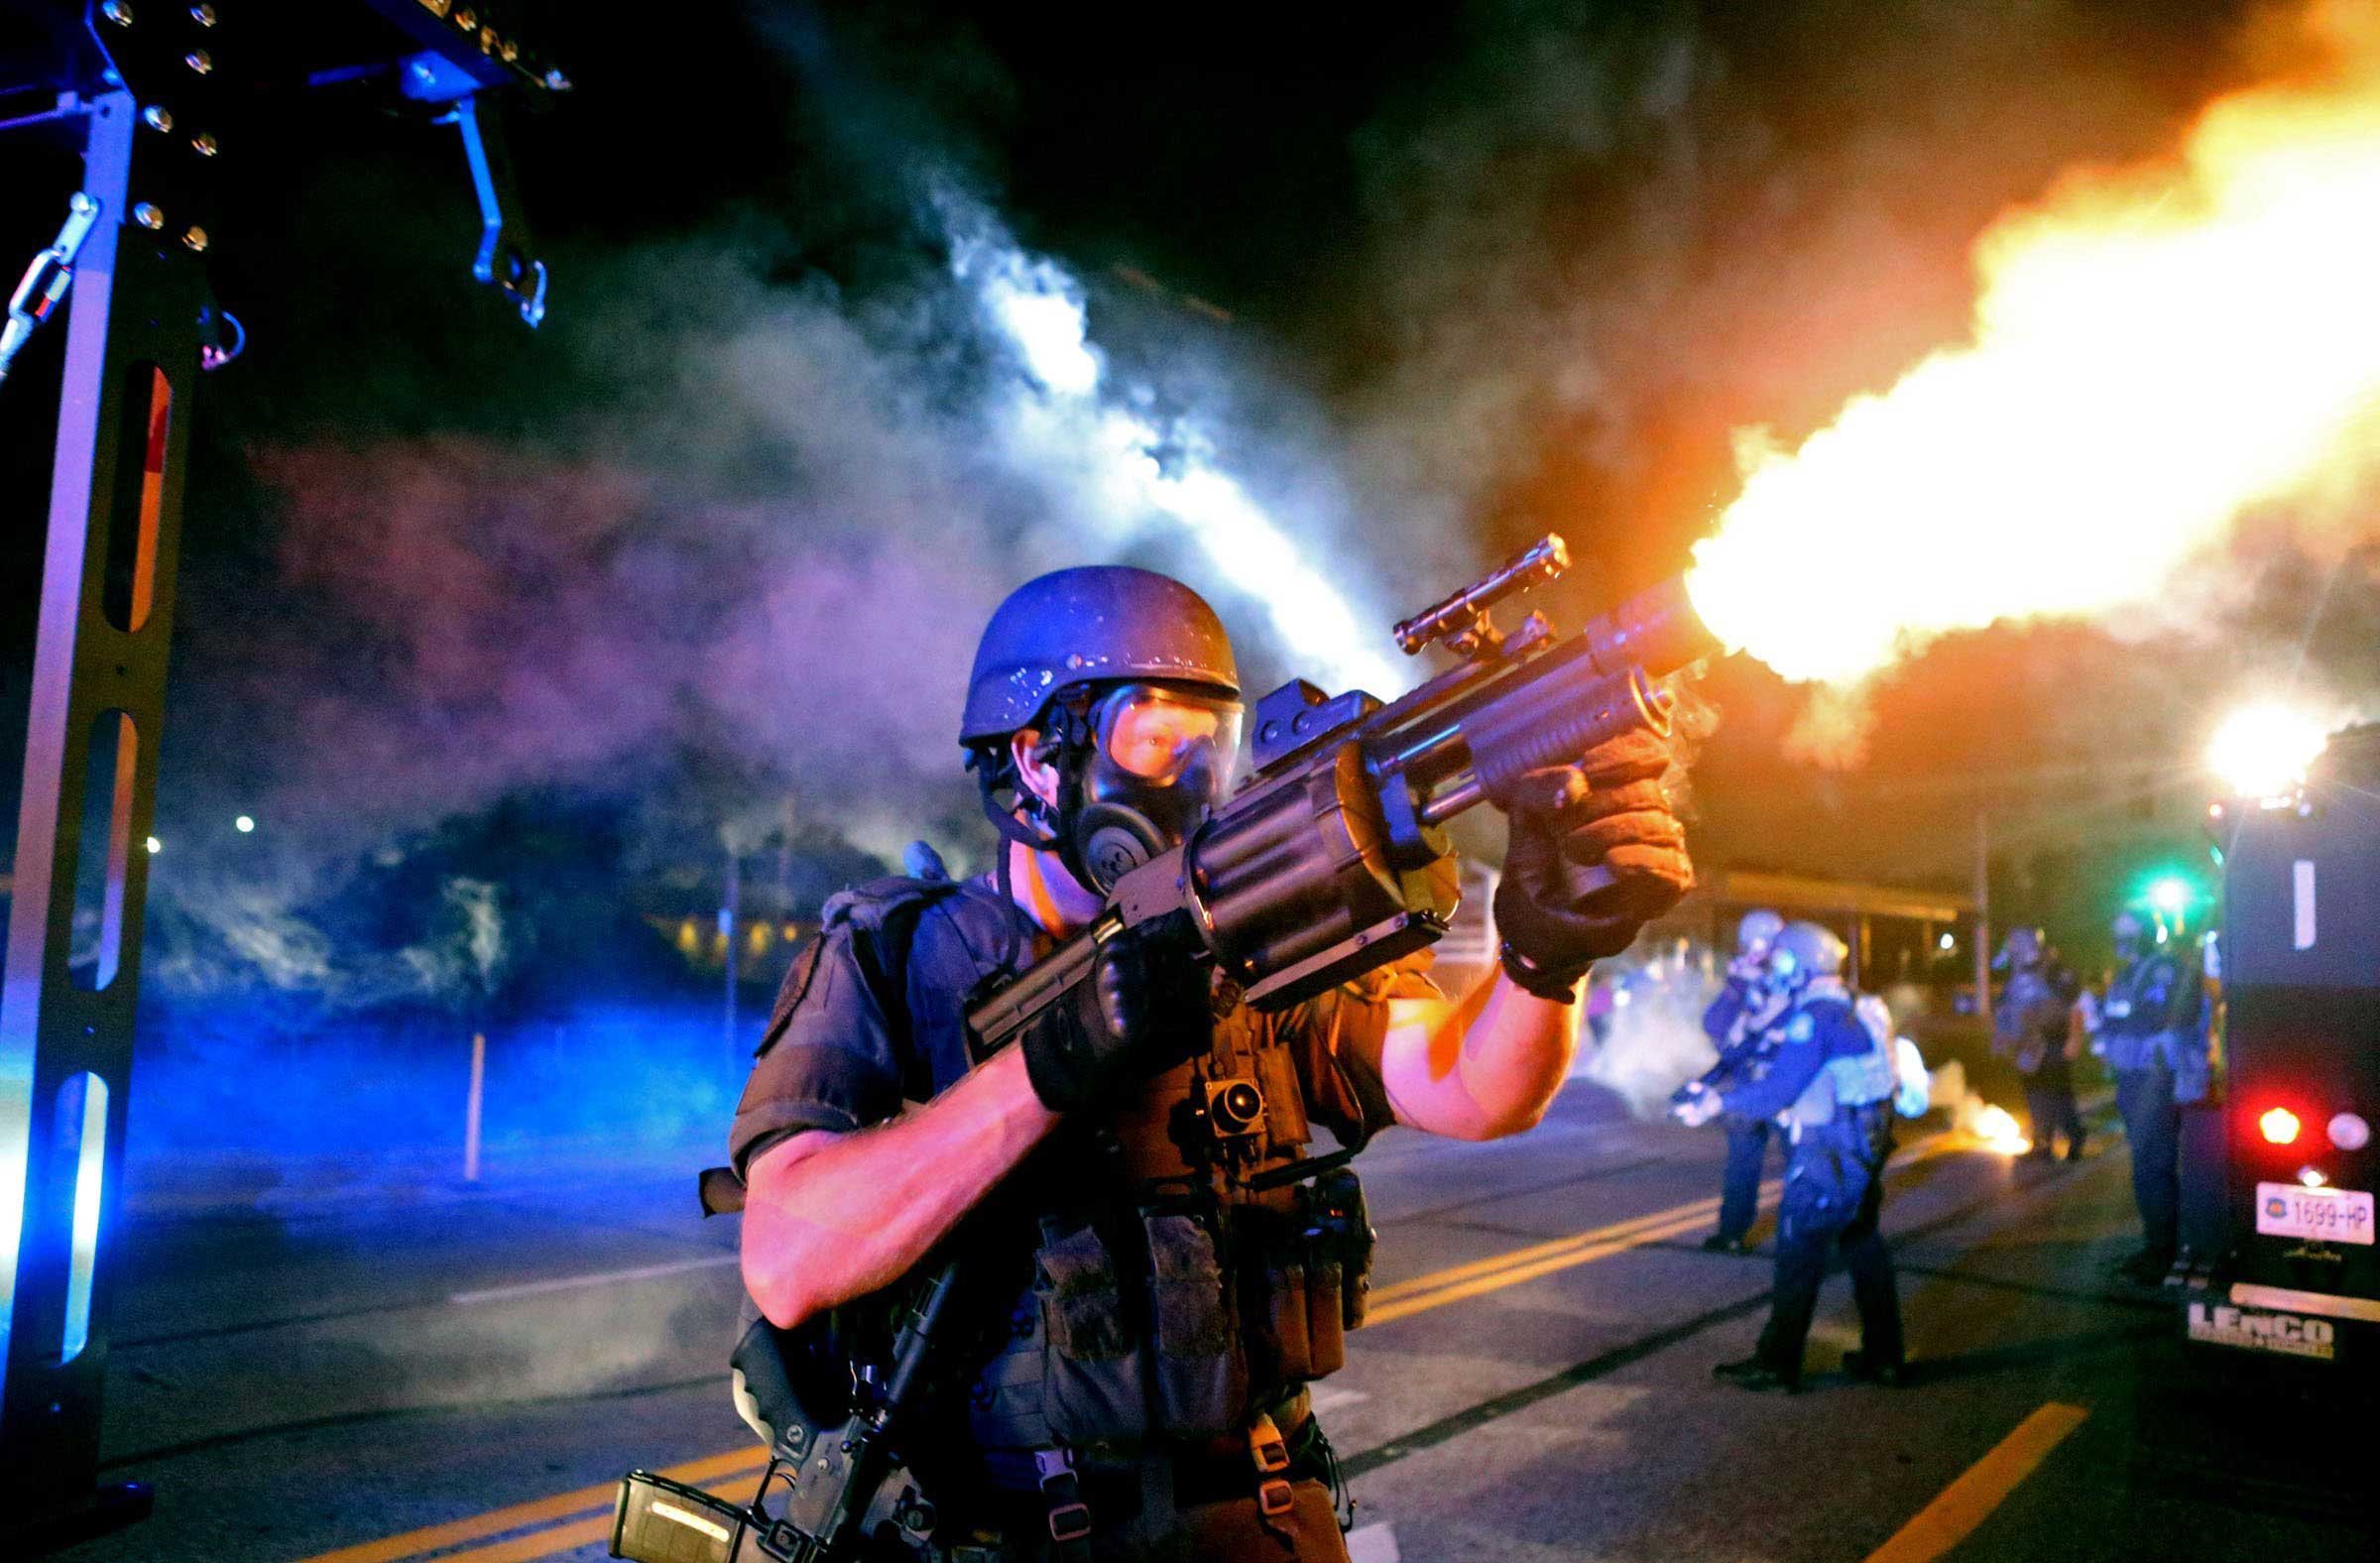 Aug. 18, 2014. Police fire tear gas in the direction of where bottles were thrown from crowds gathered near the QuikTrip on W. Florissant Avenue.